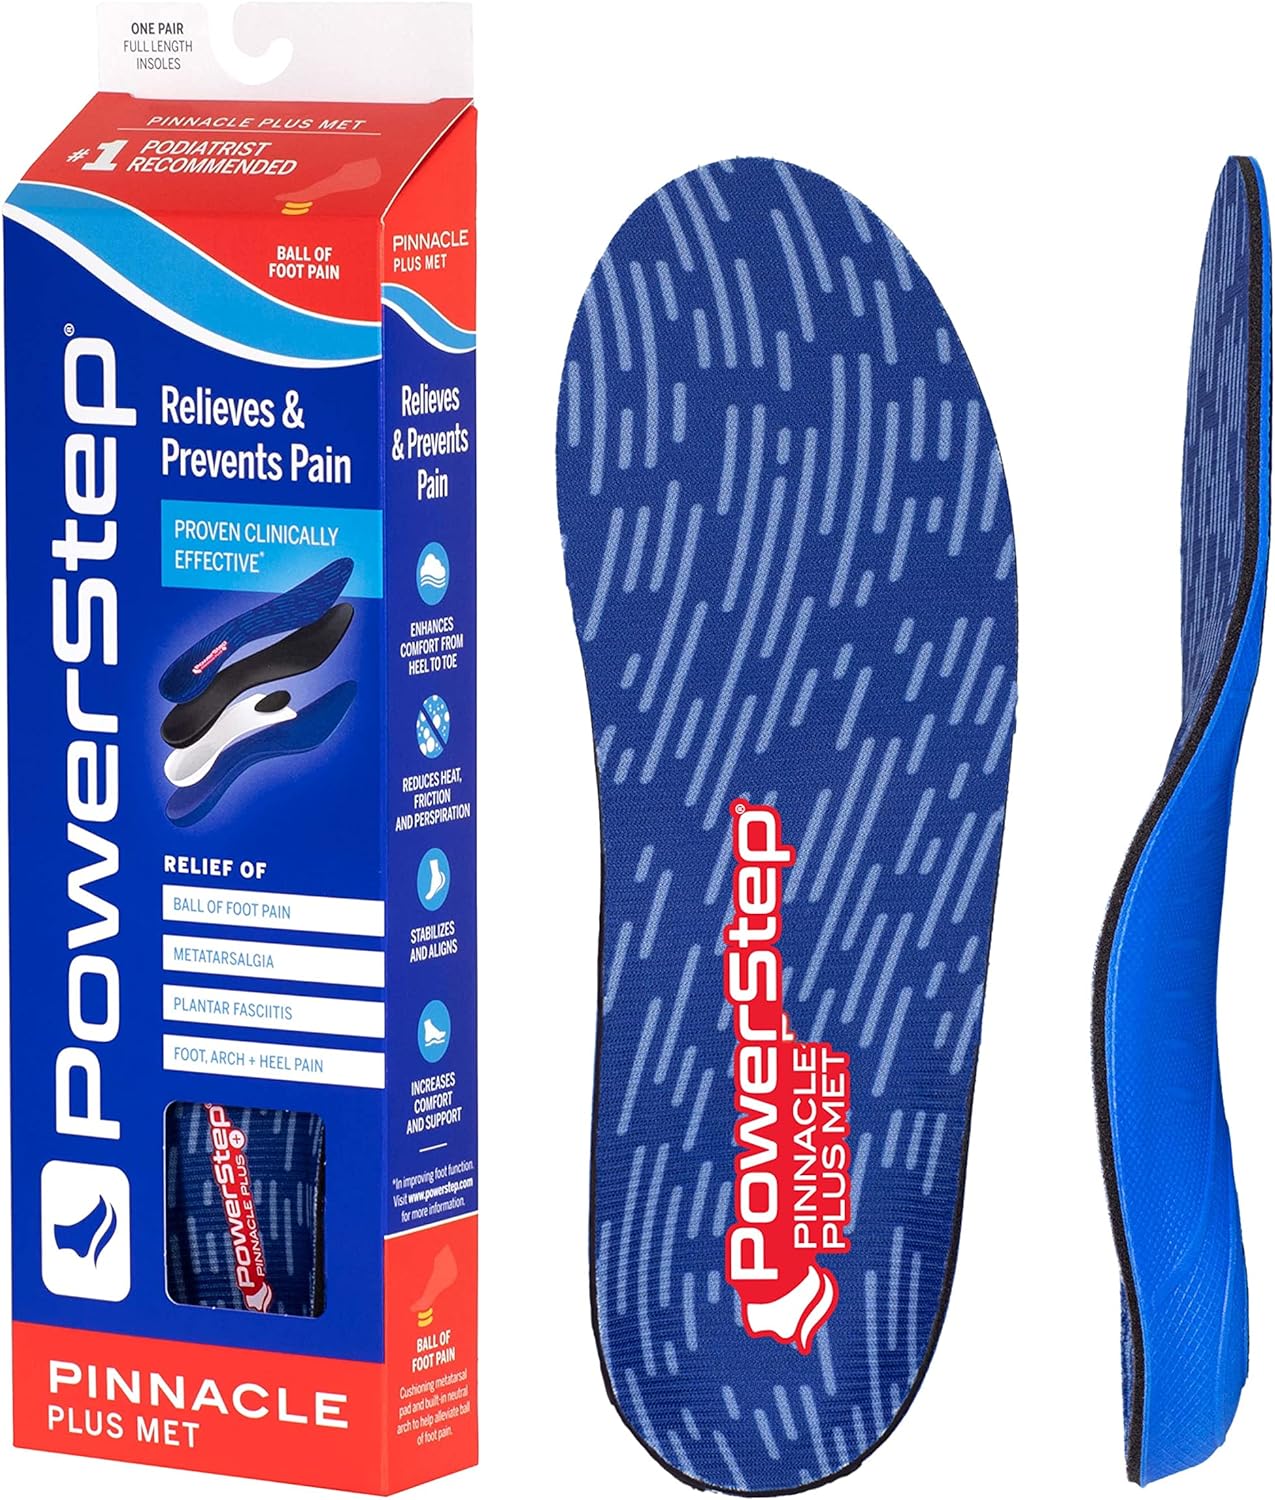 Powerstep Pinnacle Plus Ball of Foot Pain Relief Orthotics - Shoe Inserts for Metatarsalgia, Arch Support, and Mortons Neuroma Pain Relief - Shoe Insoles with Metatarsal Pad (M 5-5.5, F 7-7.5).